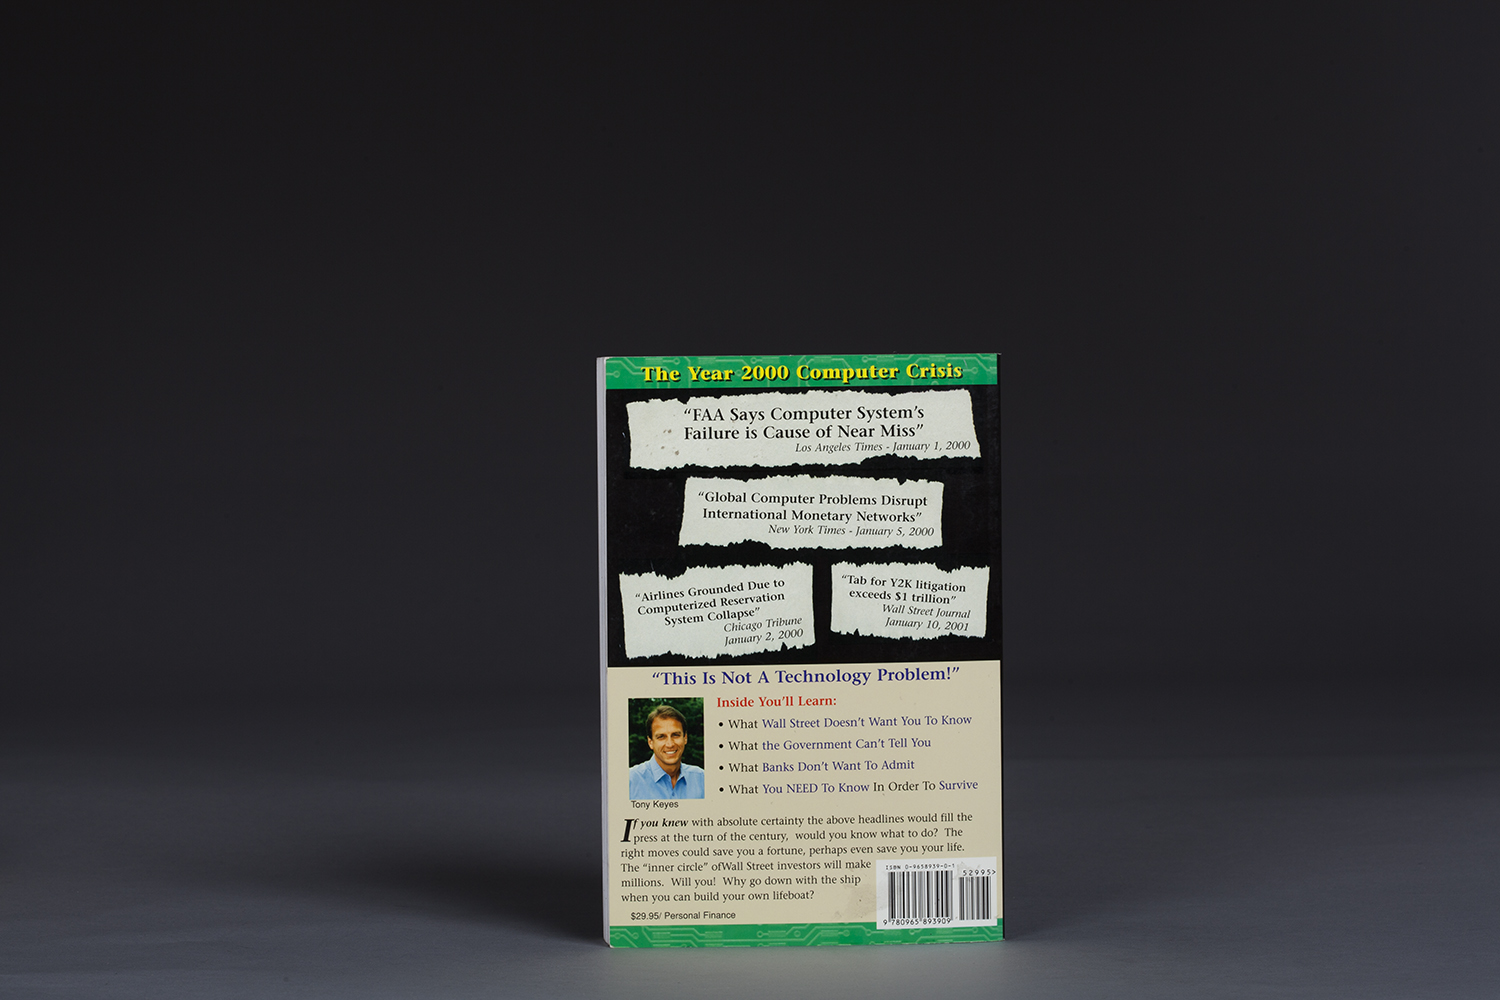 The Year 2000 Computer Crisis - An Investor's Survival Guide - 0223 Back.jpg